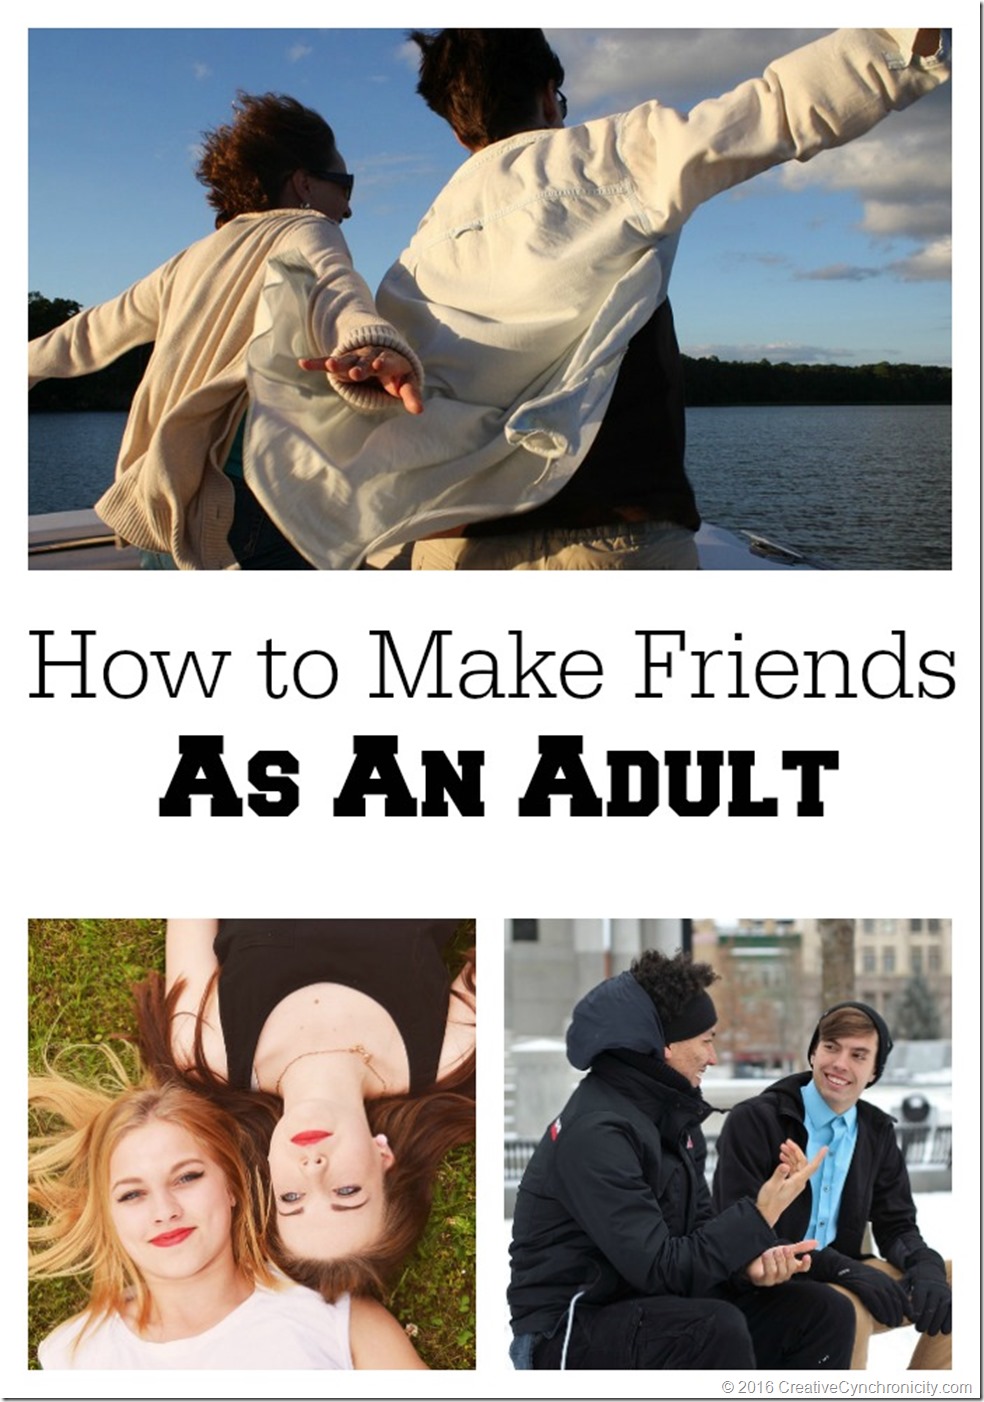 how to make friends as an adult - it's not as easy as you think